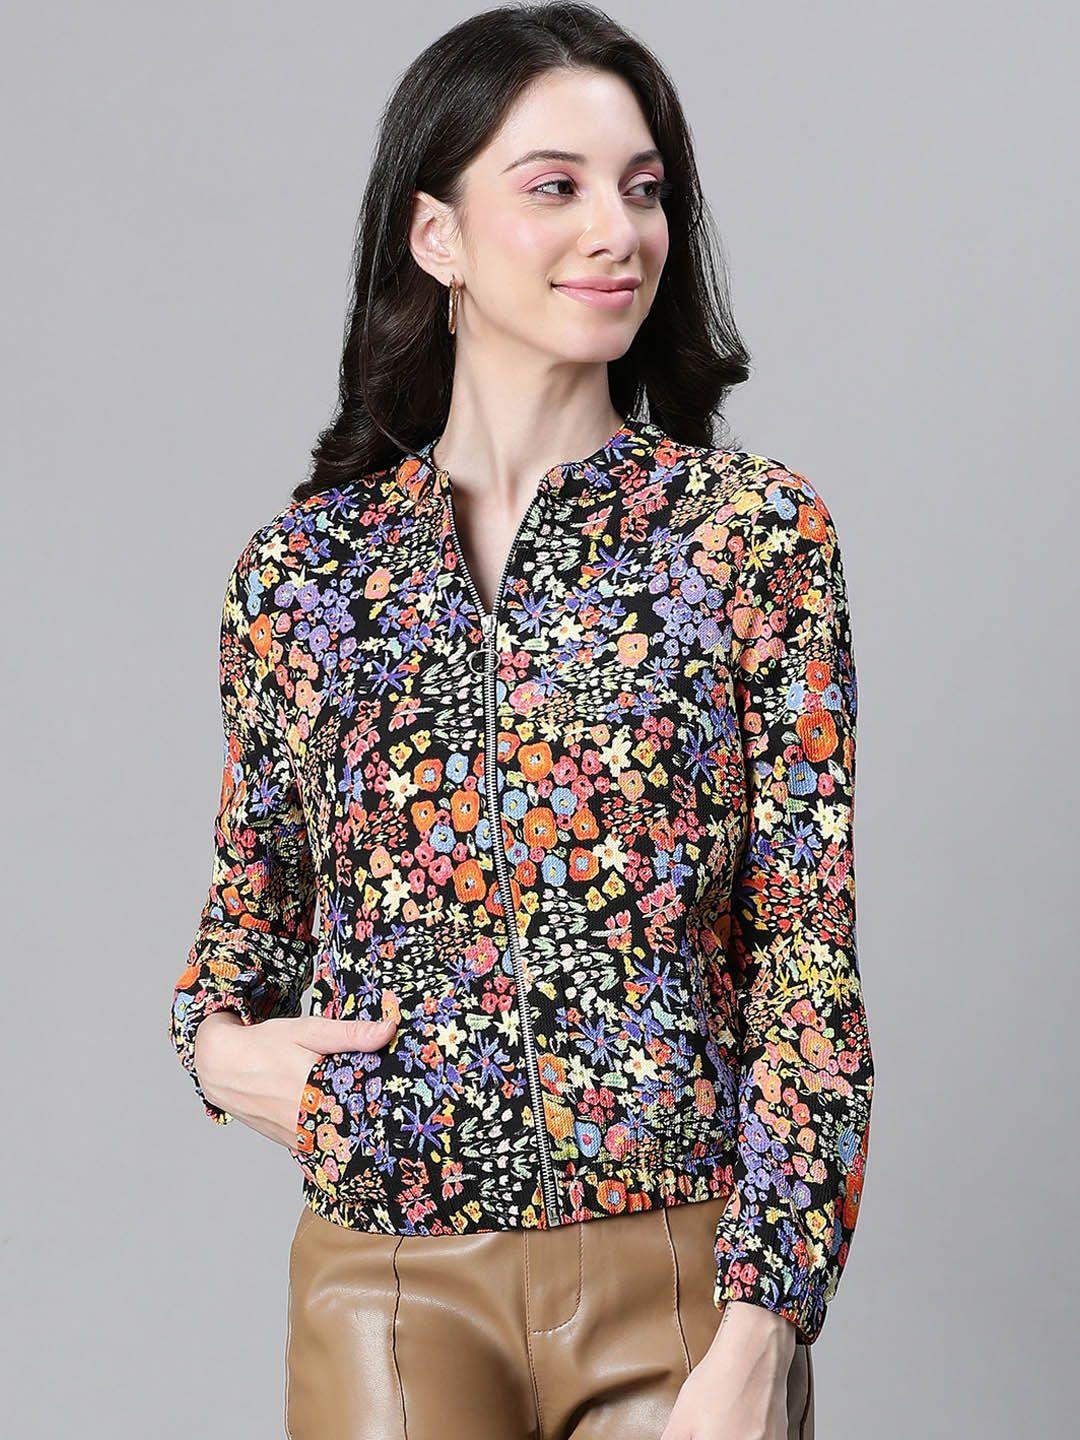 oxolloxo floral printed lightweight bomber jacket